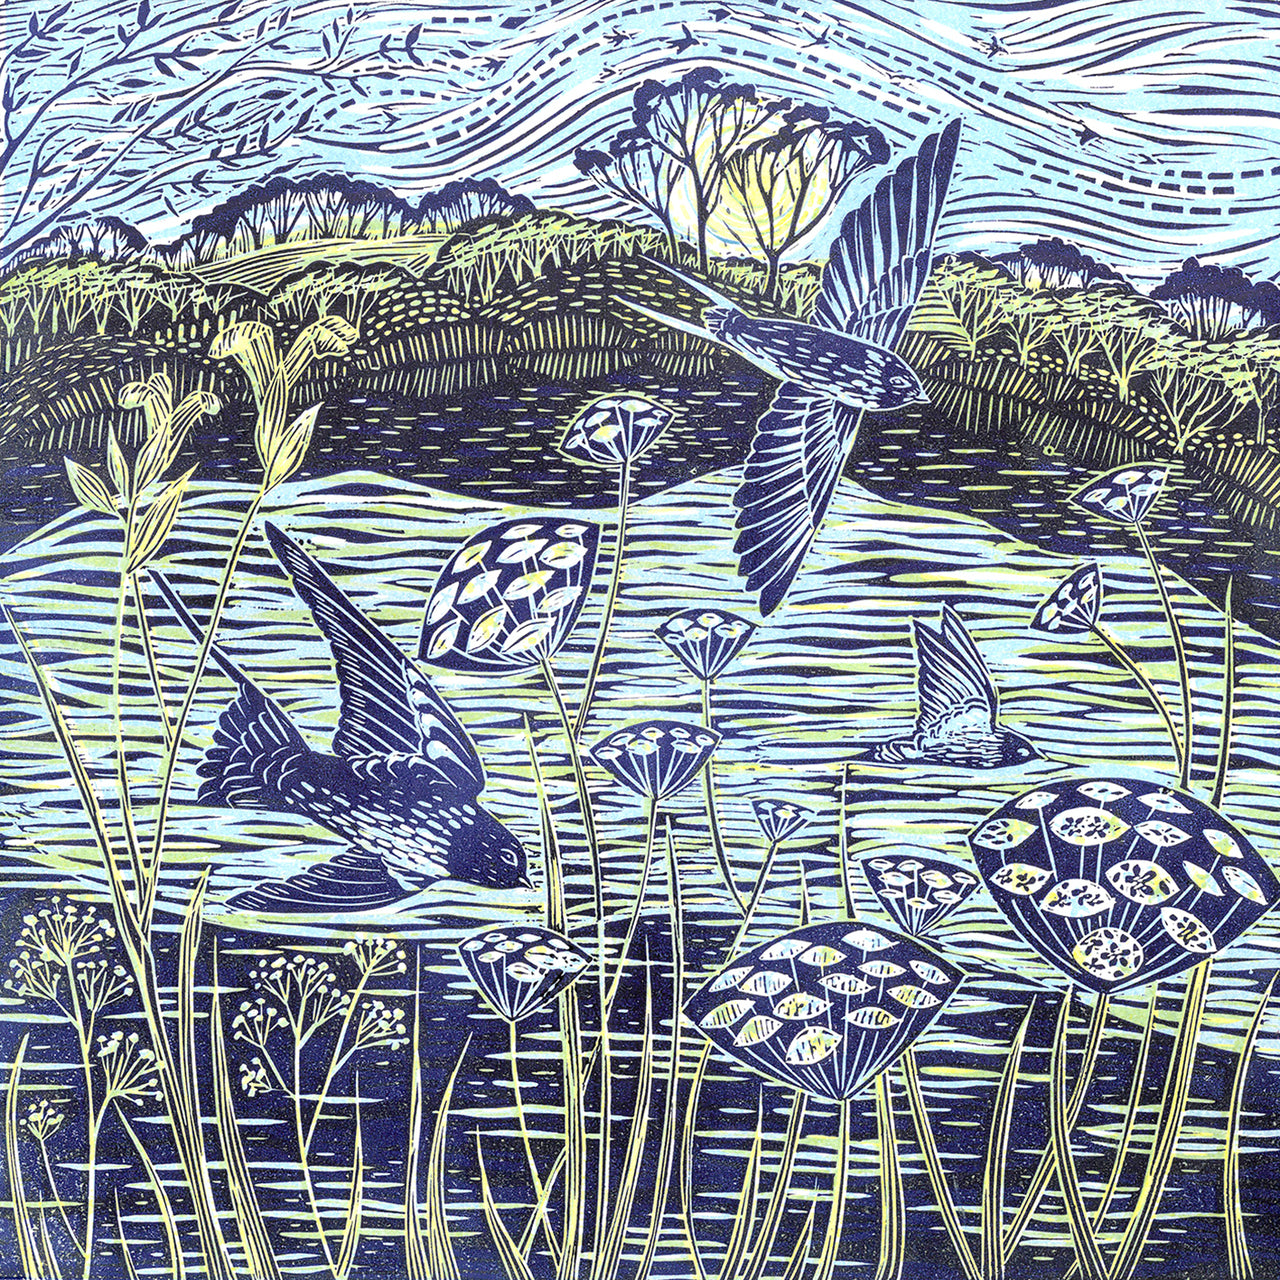 Lino print by Cornish artist Claire Armitage of swallows over lake in blue and yellow tones.